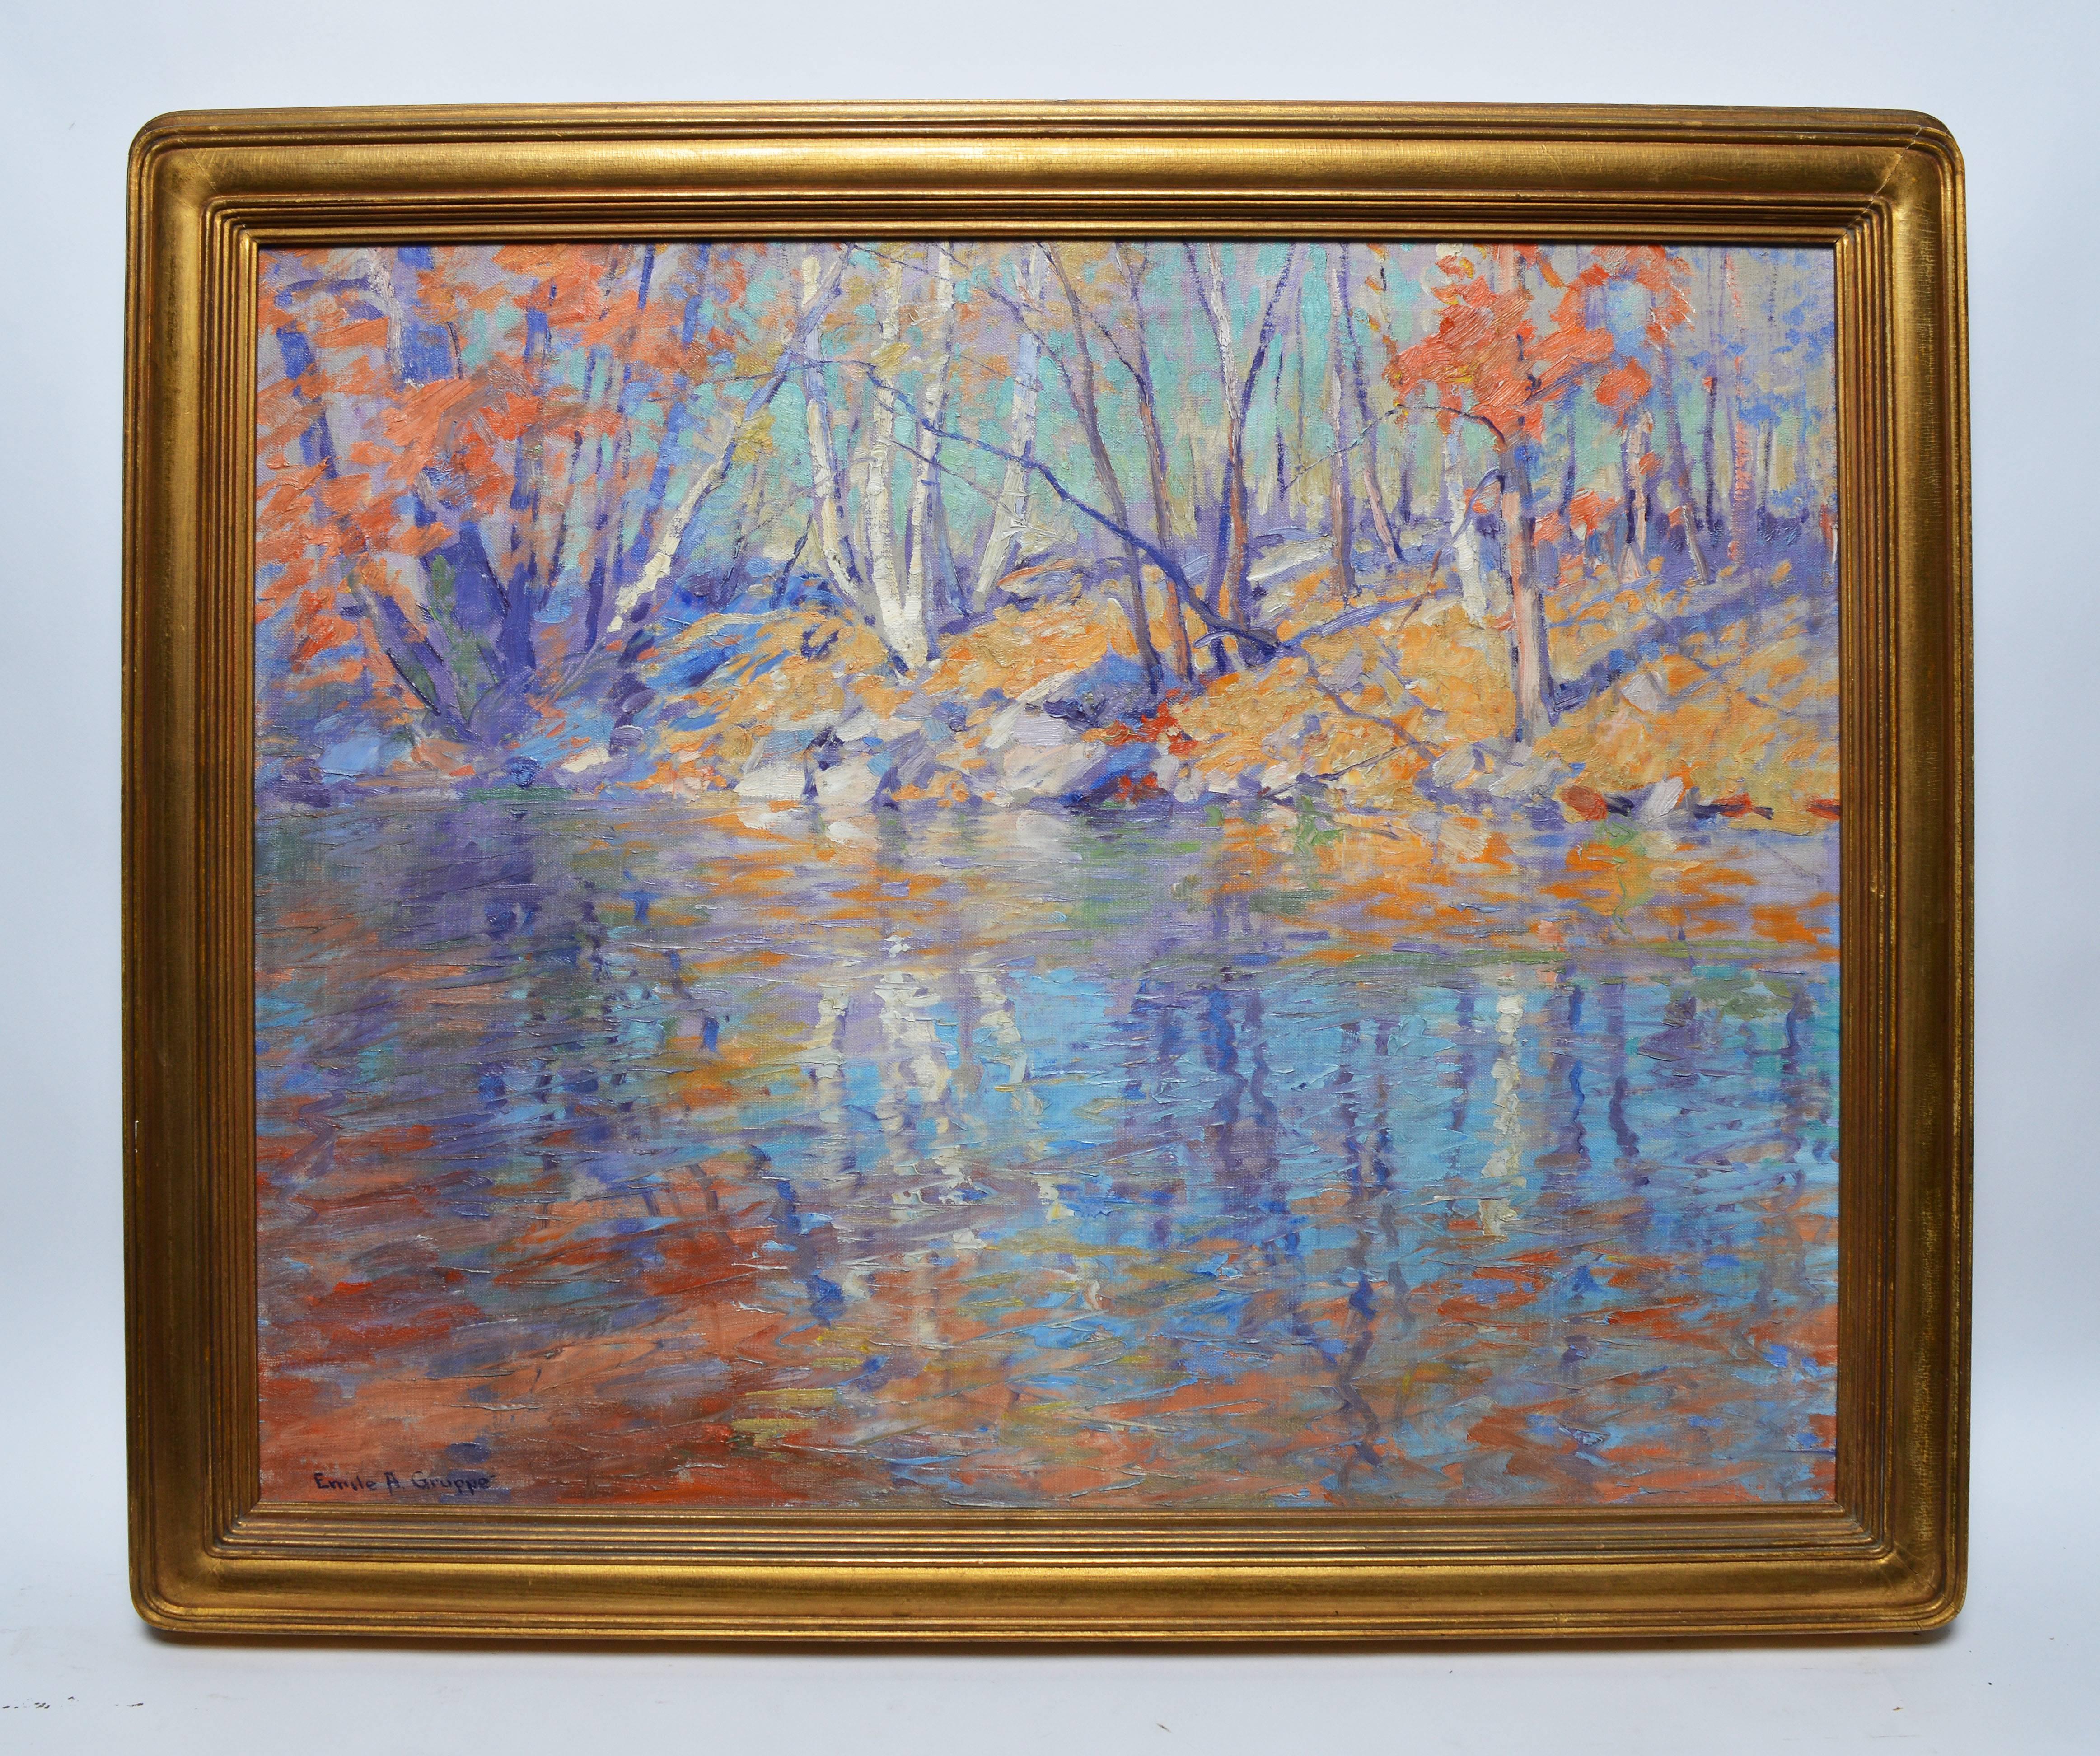 Fall Reflections - Painting by Emile Albert Gruppe